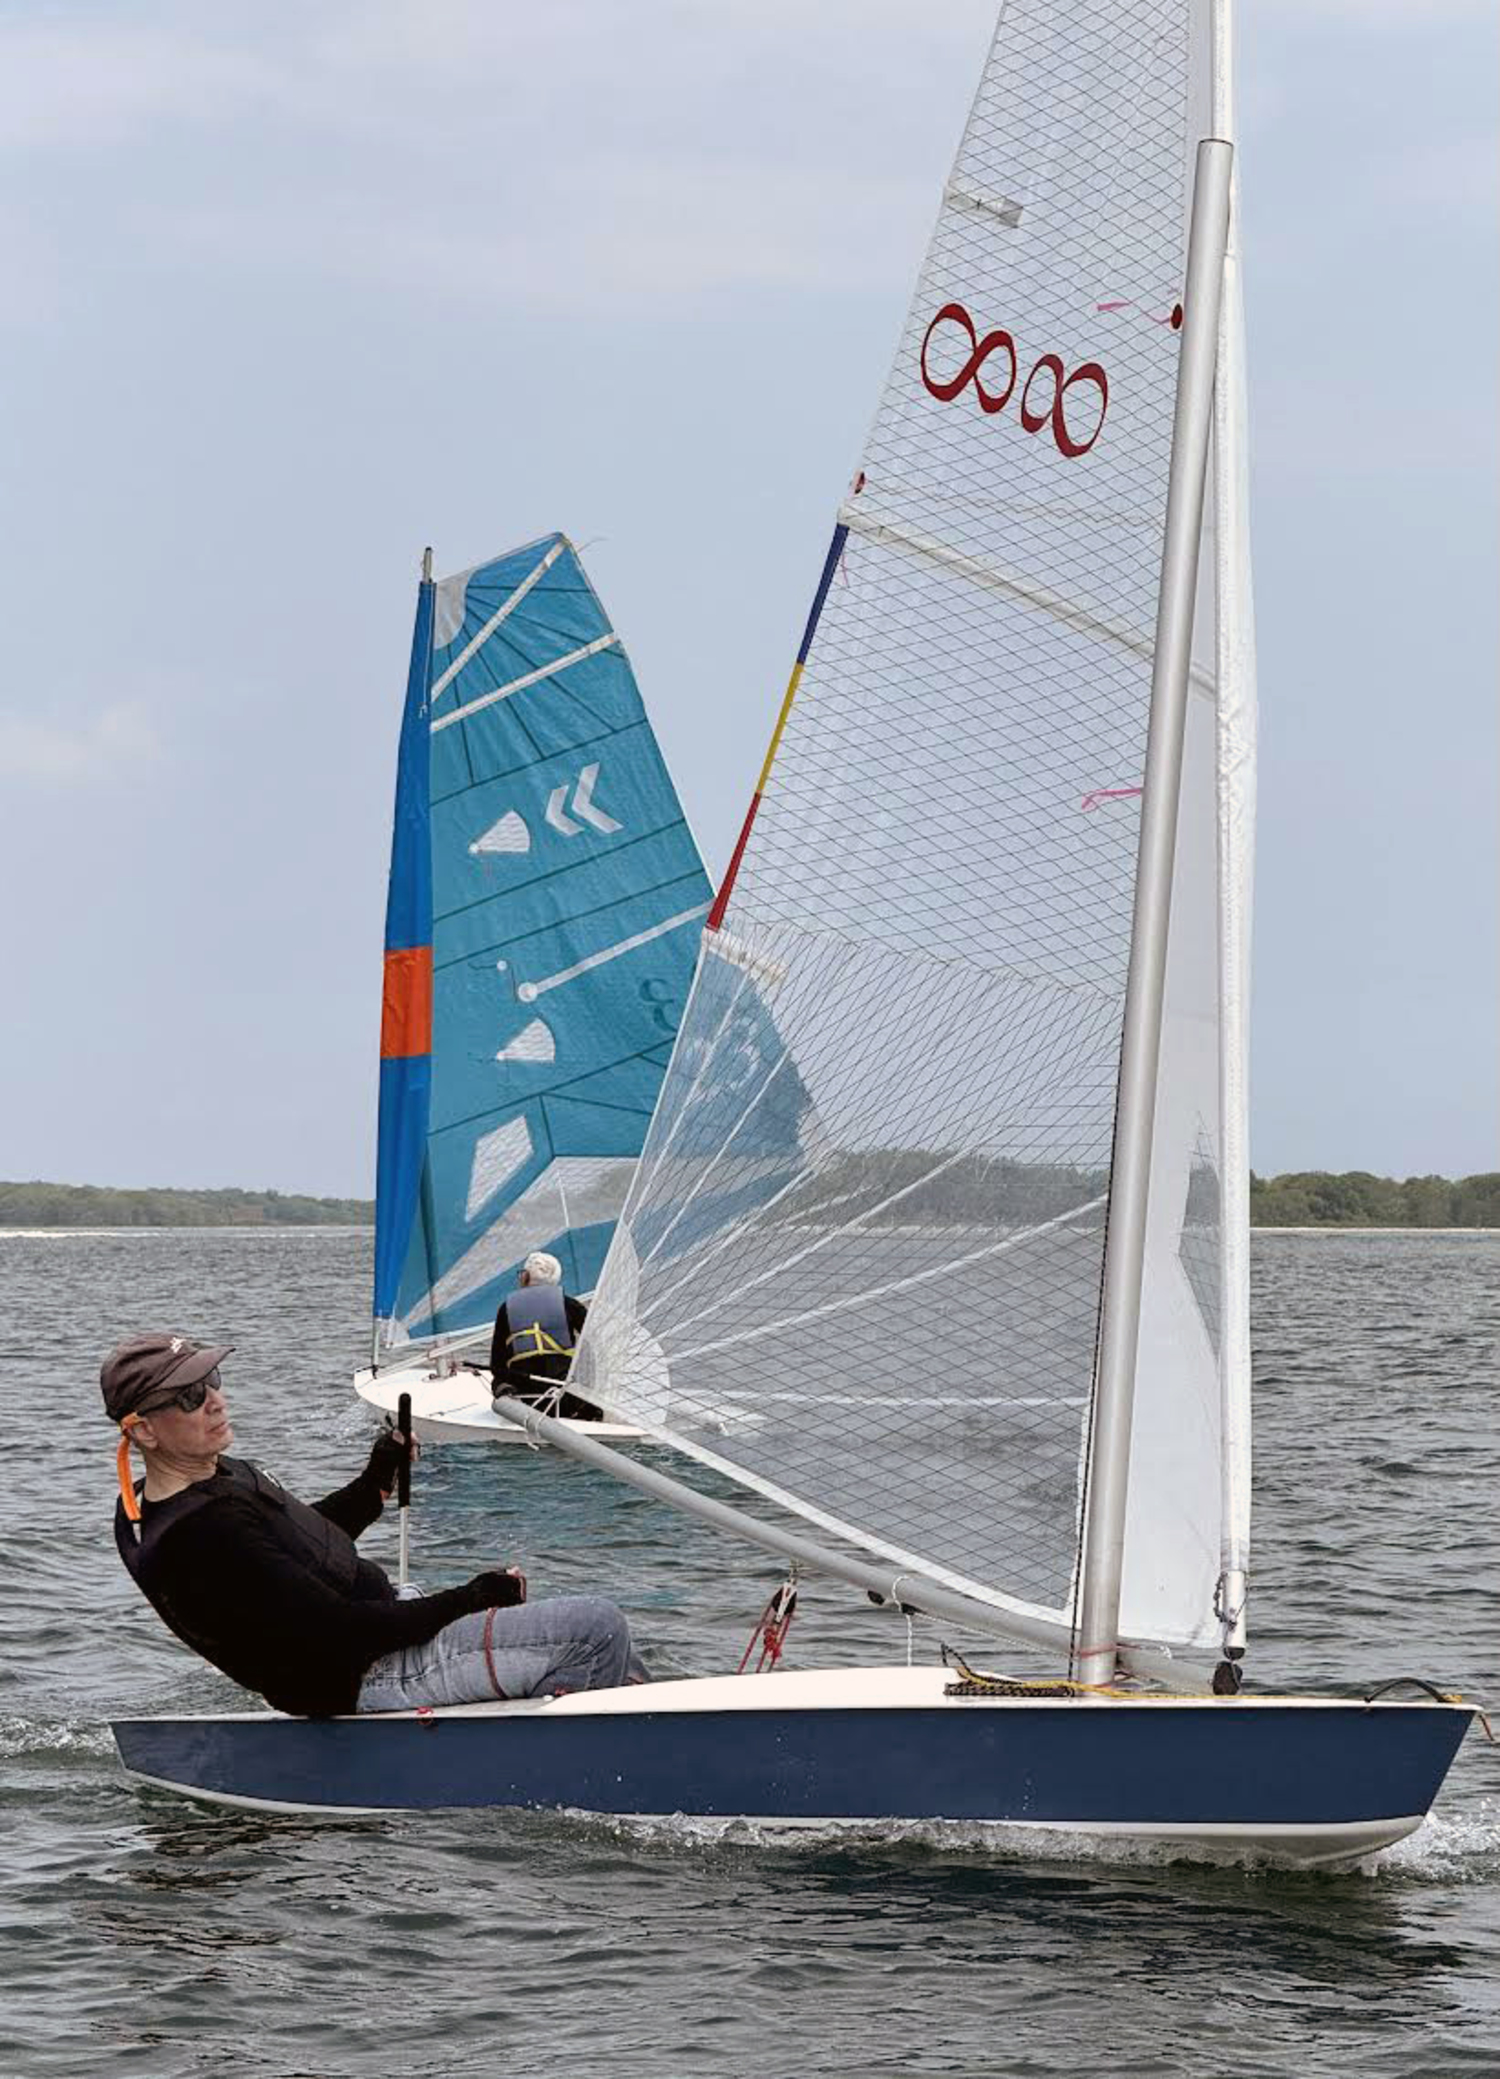 Sag Harbor architect Jim Merrell working his way close-hauled to the finish line while Richard Coles broad-reaches for the leeward mark.  MICHAEL MELLA